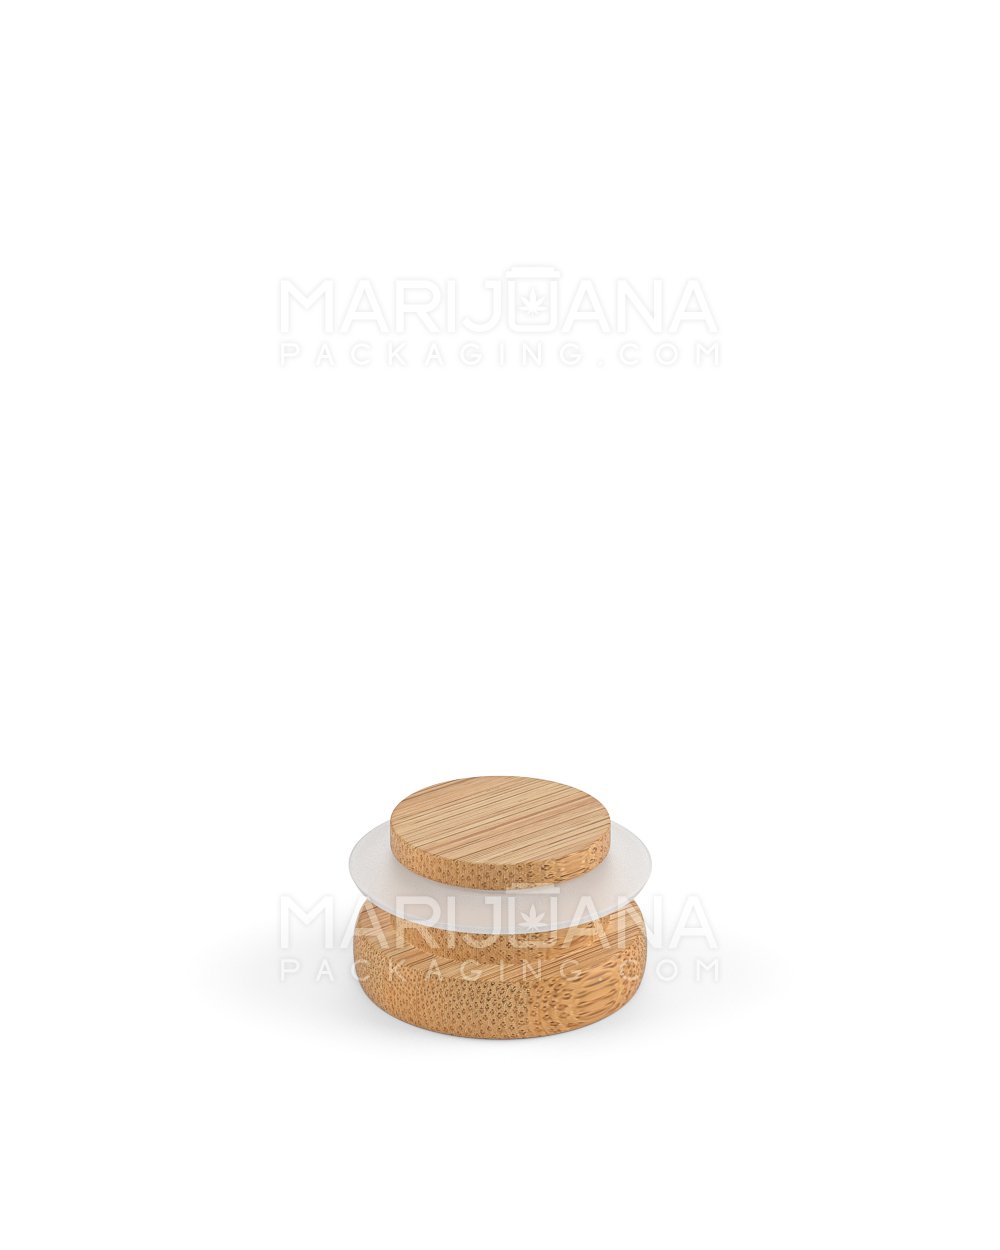 Glass Jar with Wooden Lid | 1oz - 8 Dram - 200 Count - 11